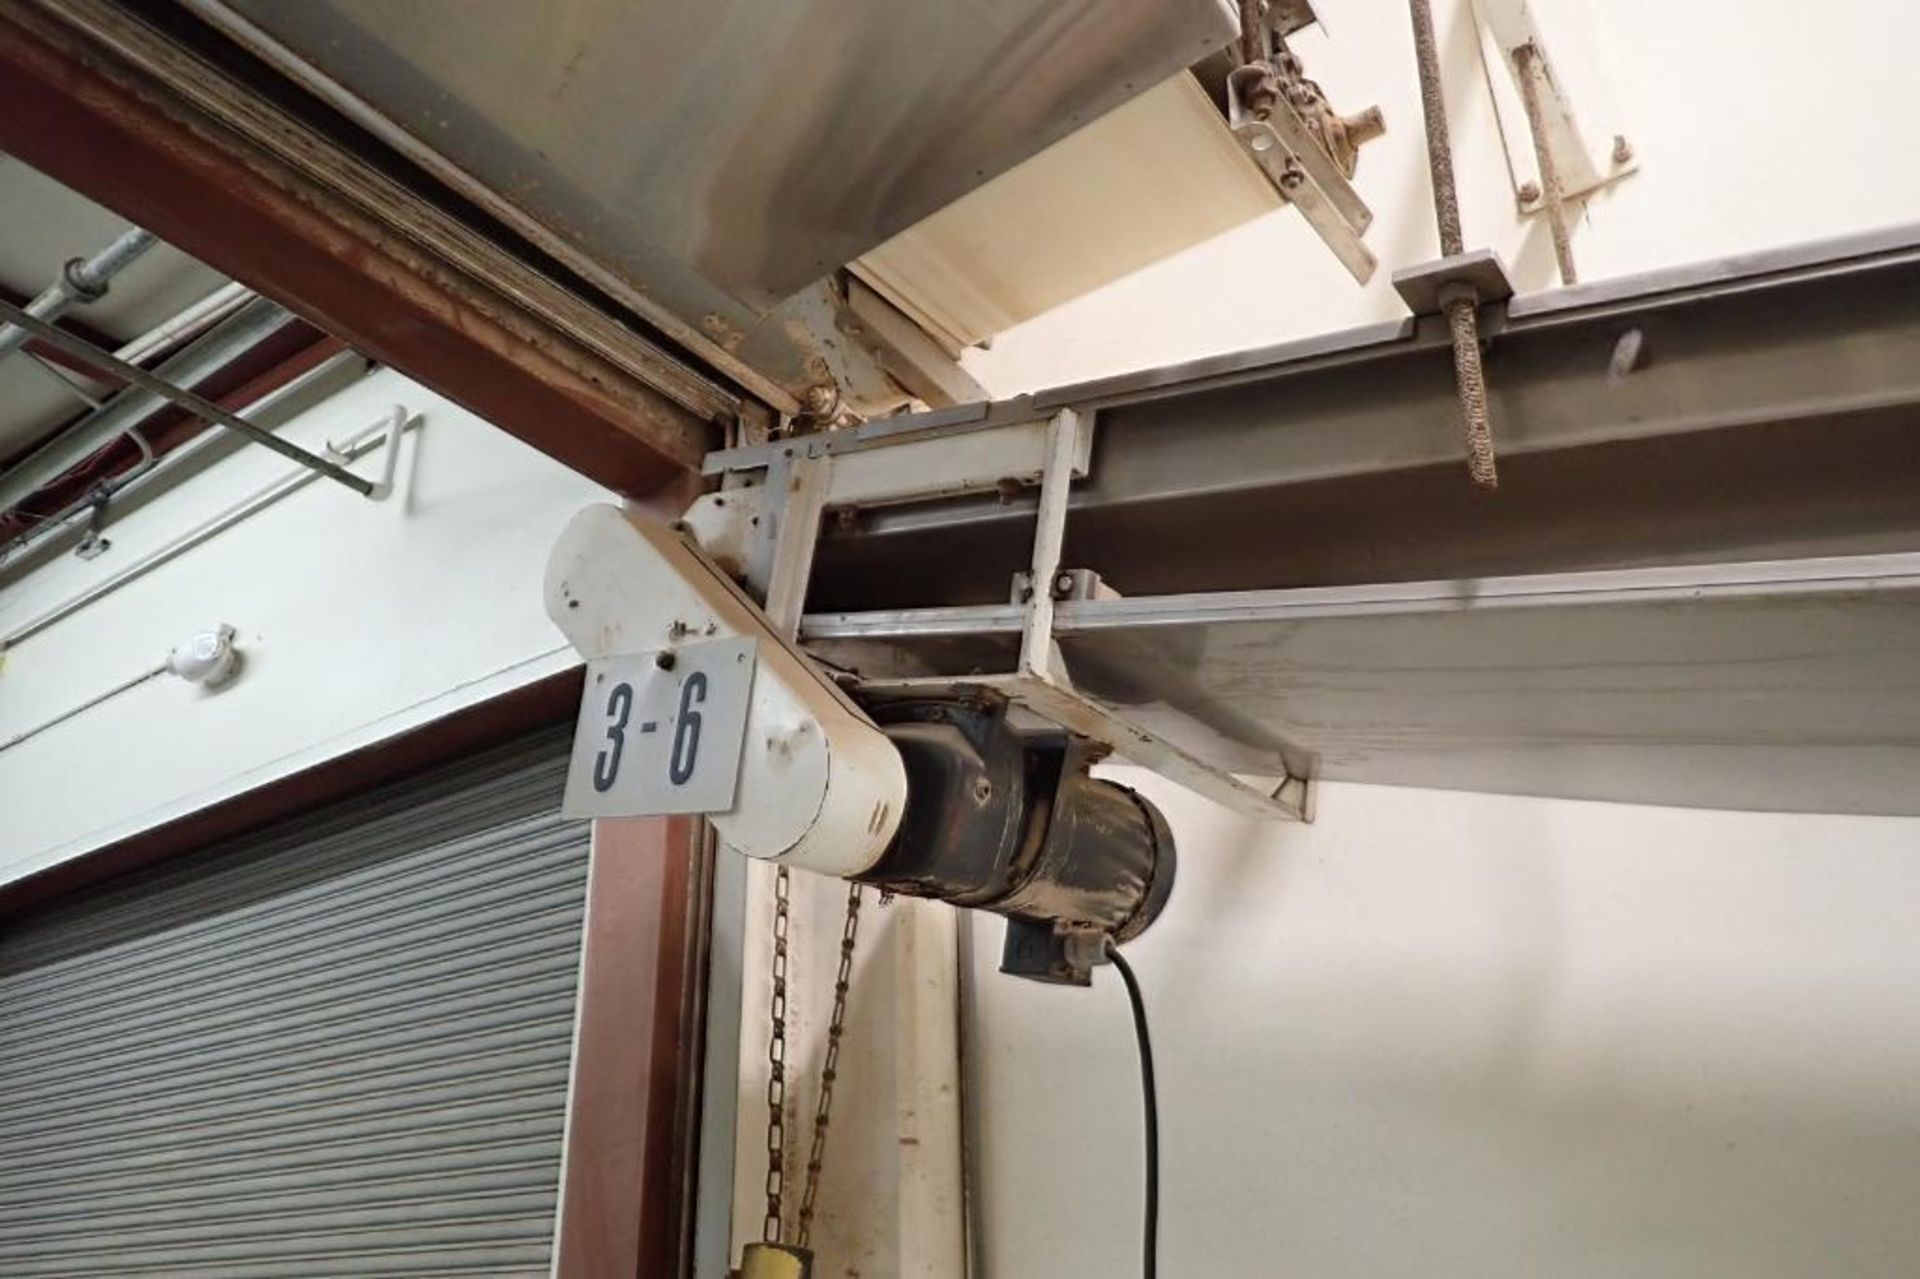 Mild Steel decline belt conveyor, 16 ft. long x 17 in. wide, suspended from ceiling. **Rigging Fee: - Image 2 of 4